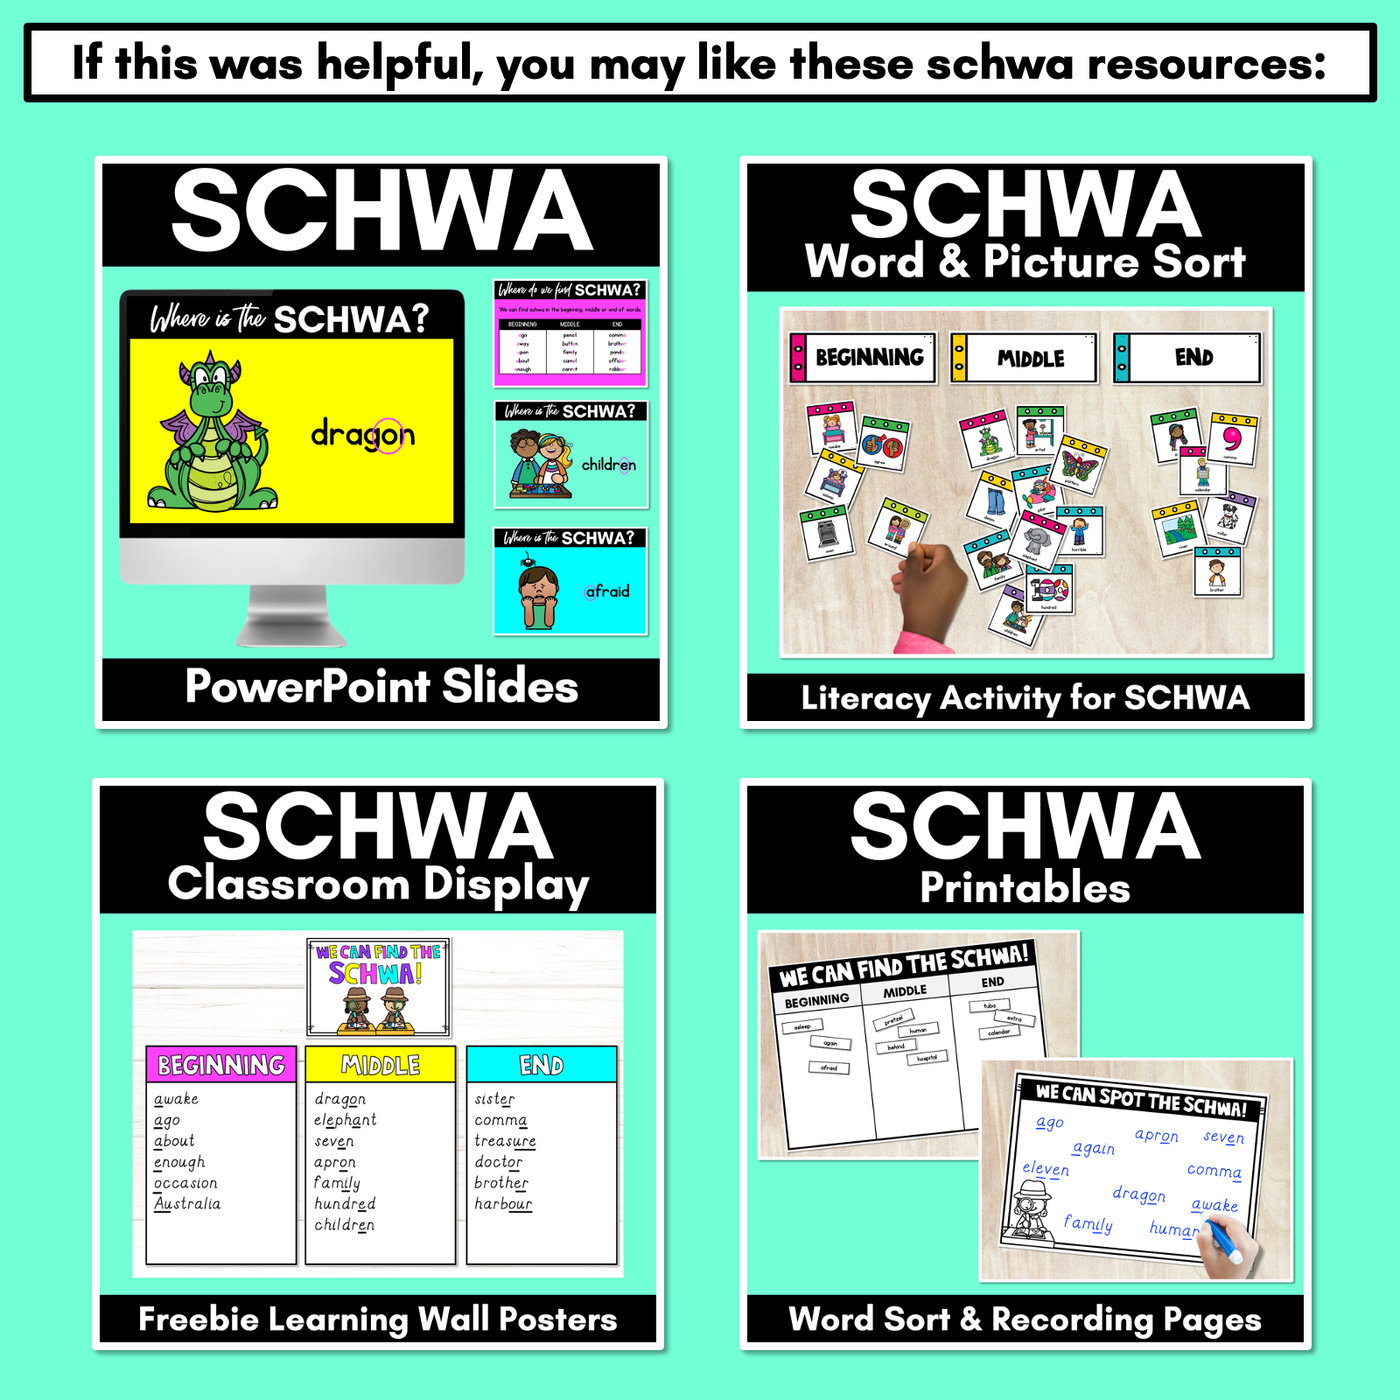 Schwa Game - Roll and find the schwa words